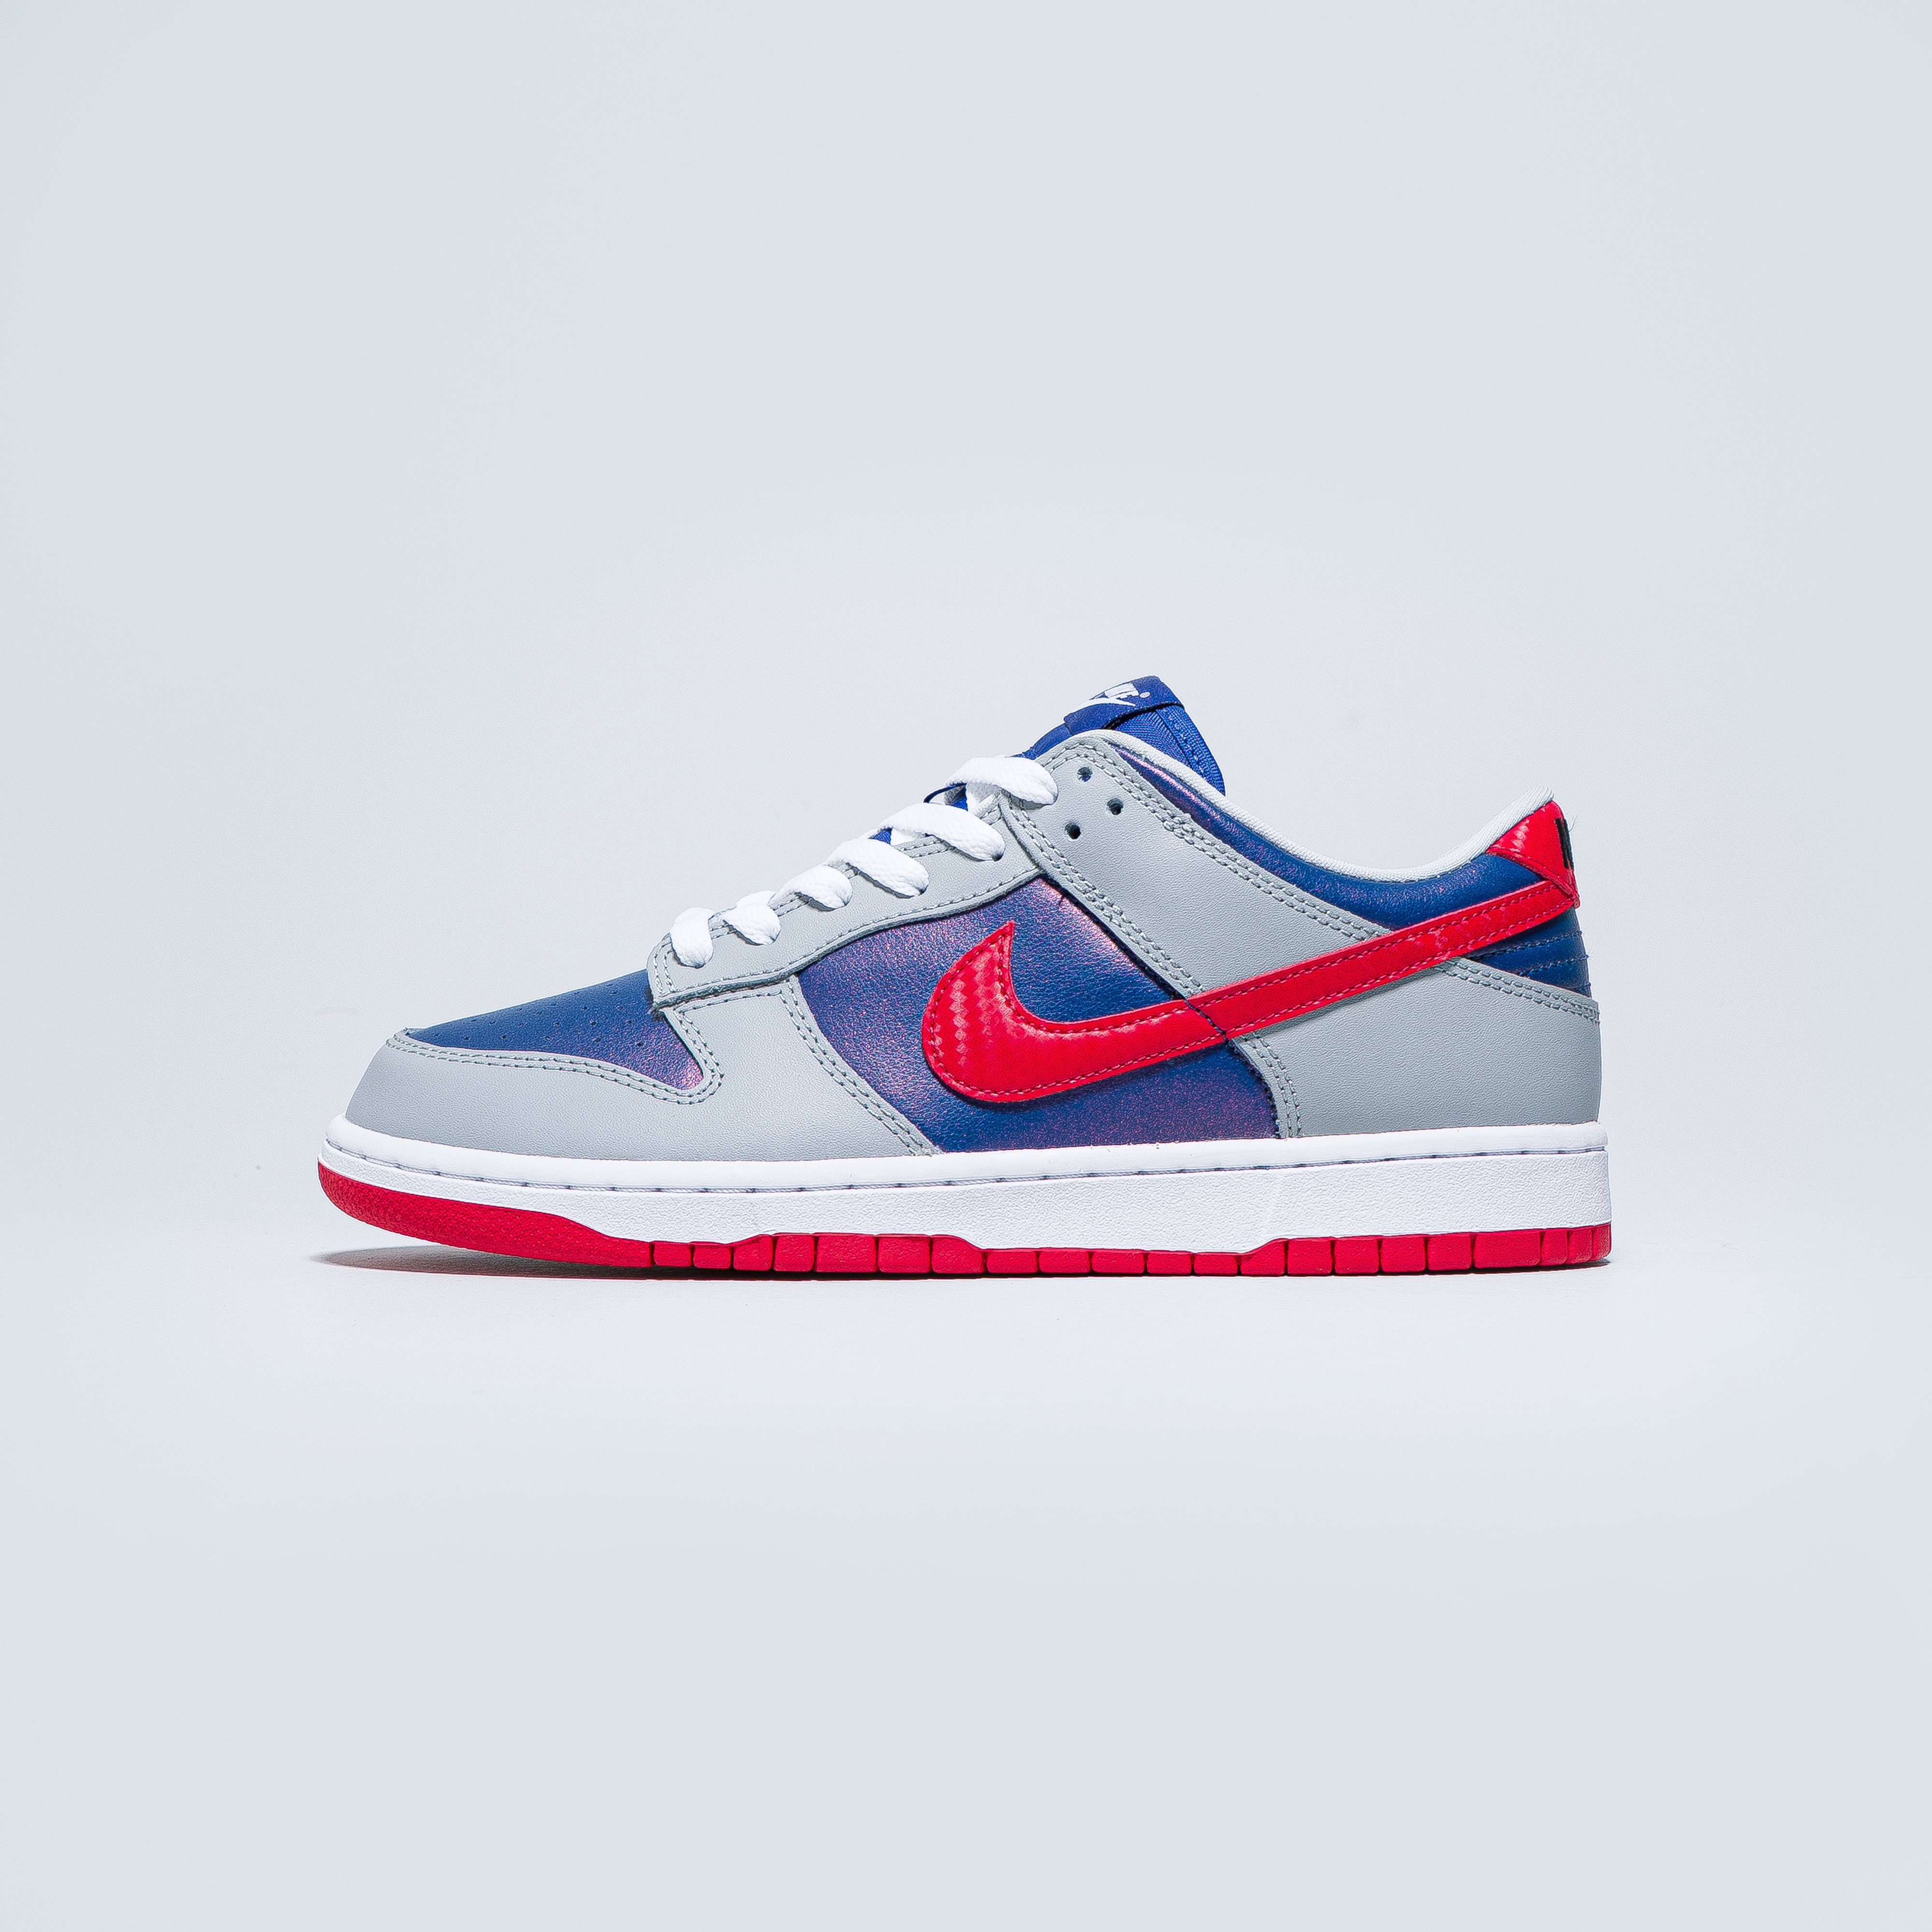 Nike - Dunk Low SP - Hyper Blue/Samba-Silver - Up There